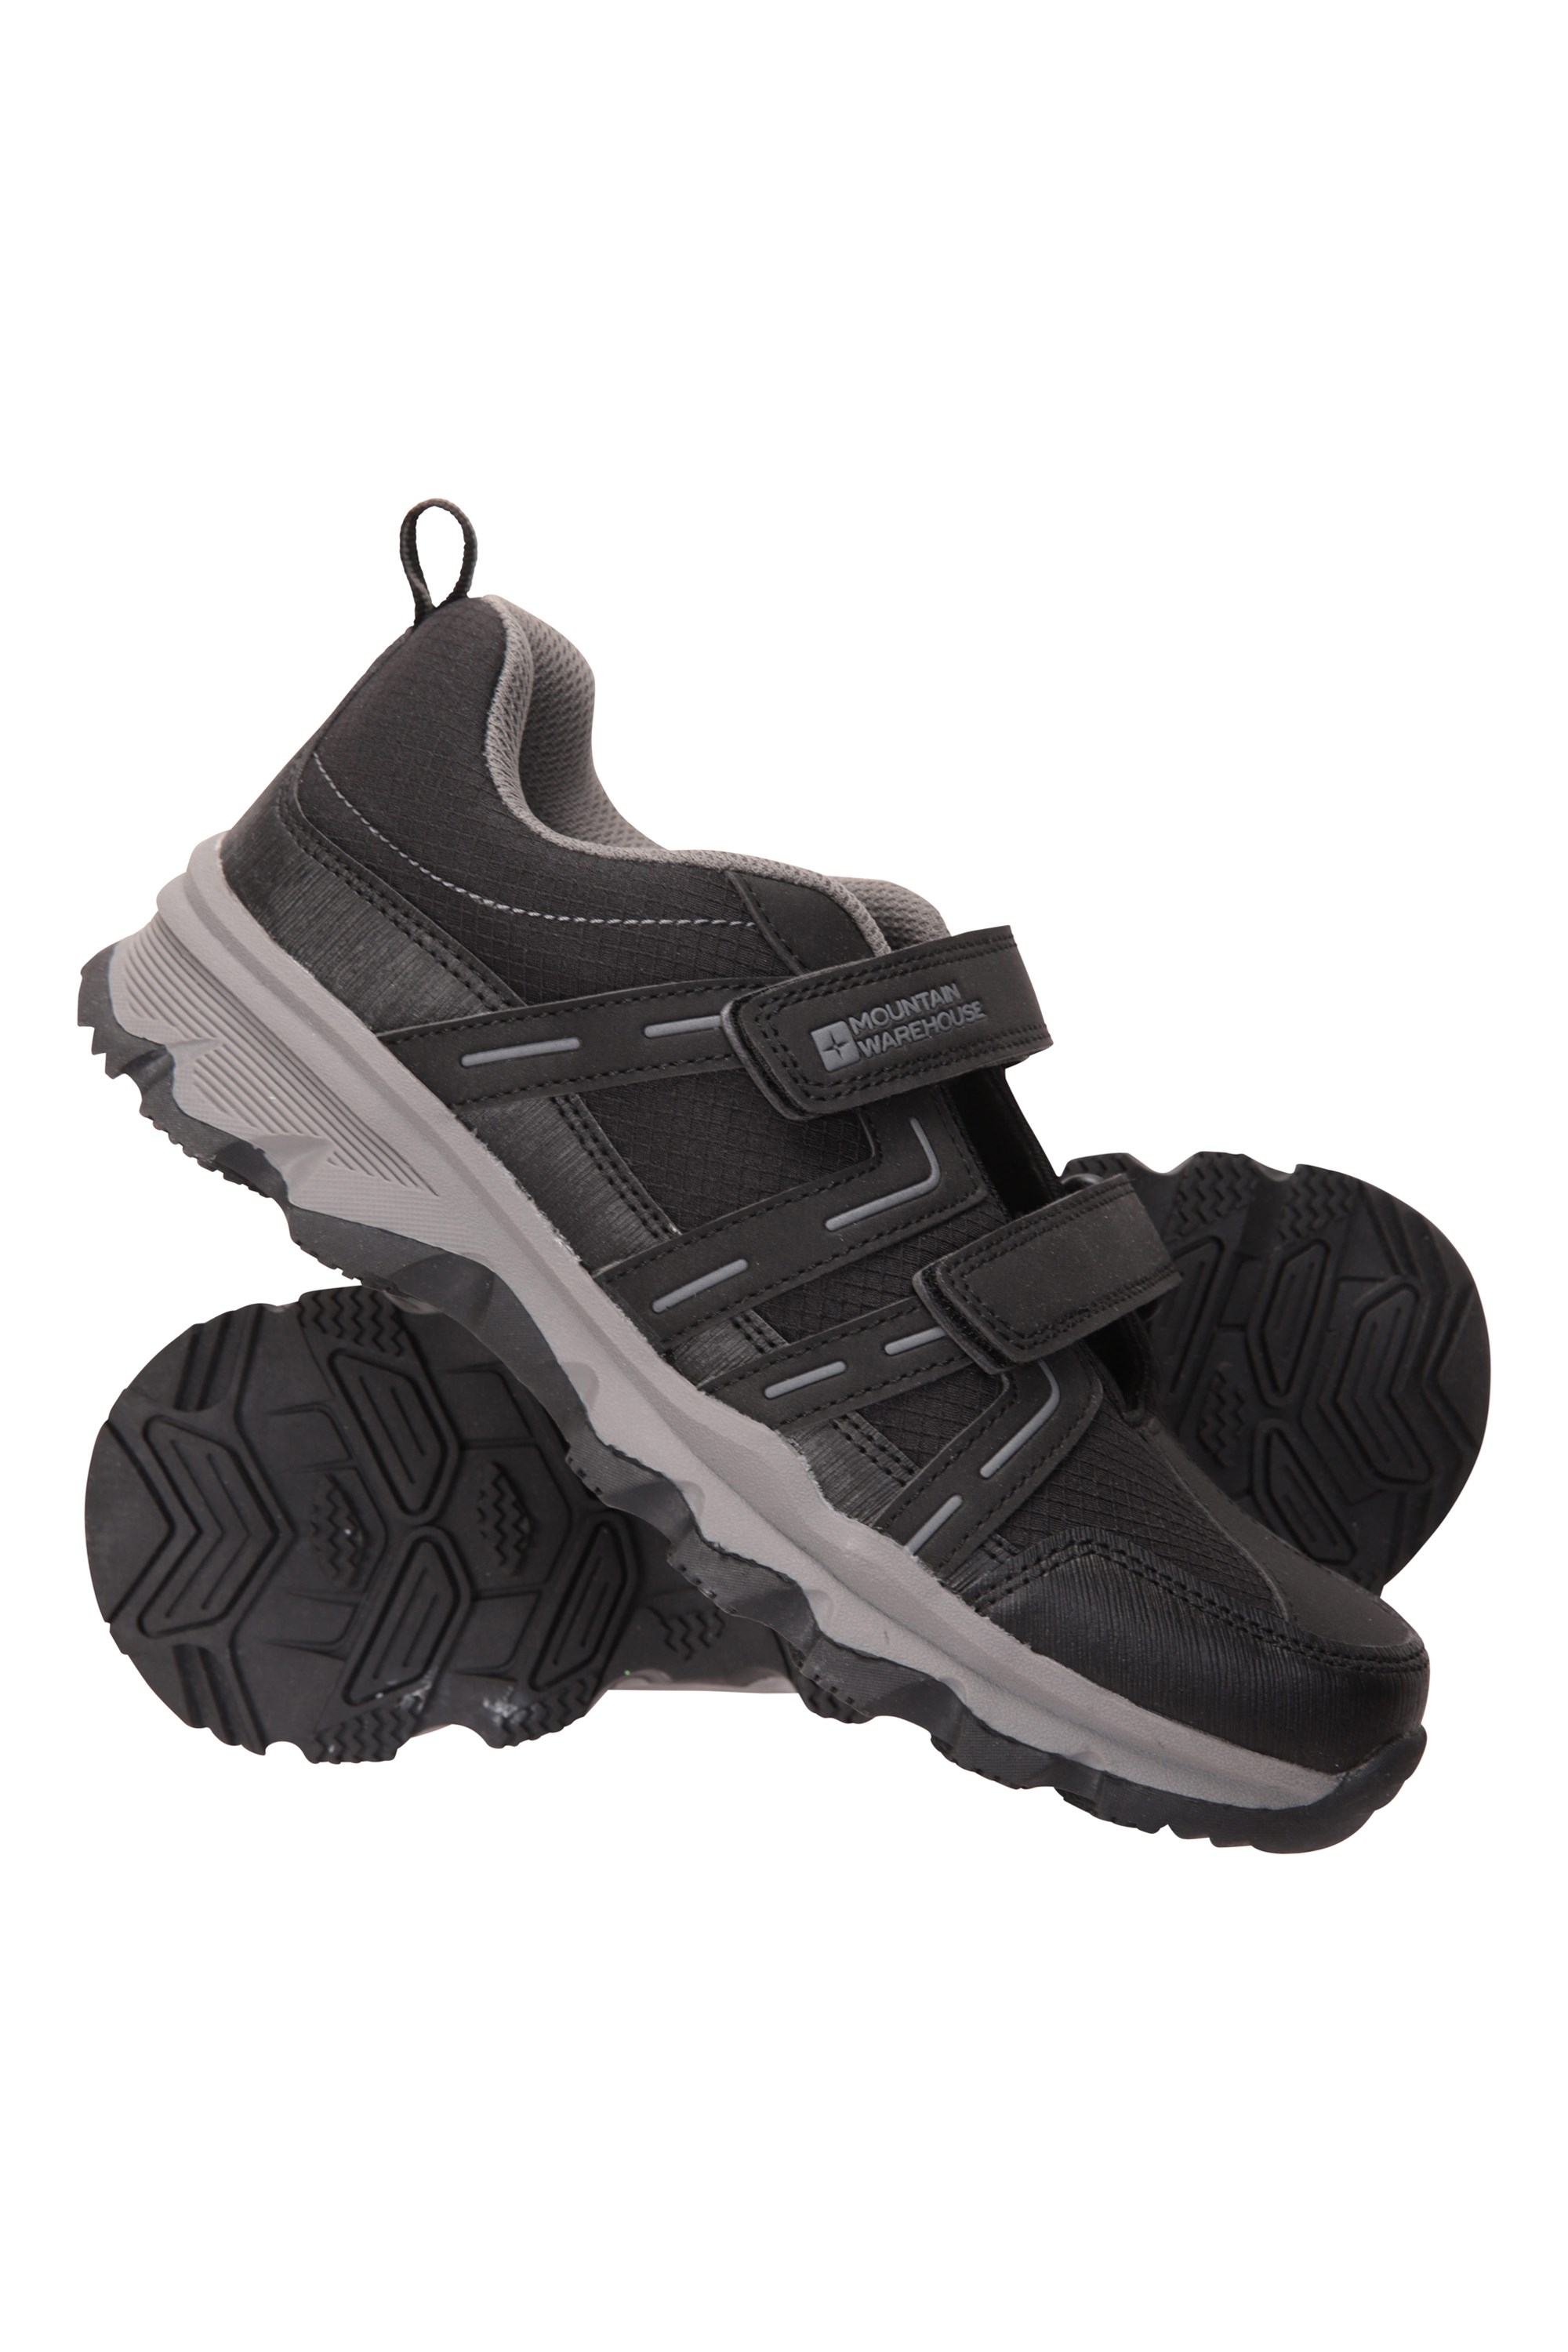 Cannonball Kids Hiking Shoes - Black